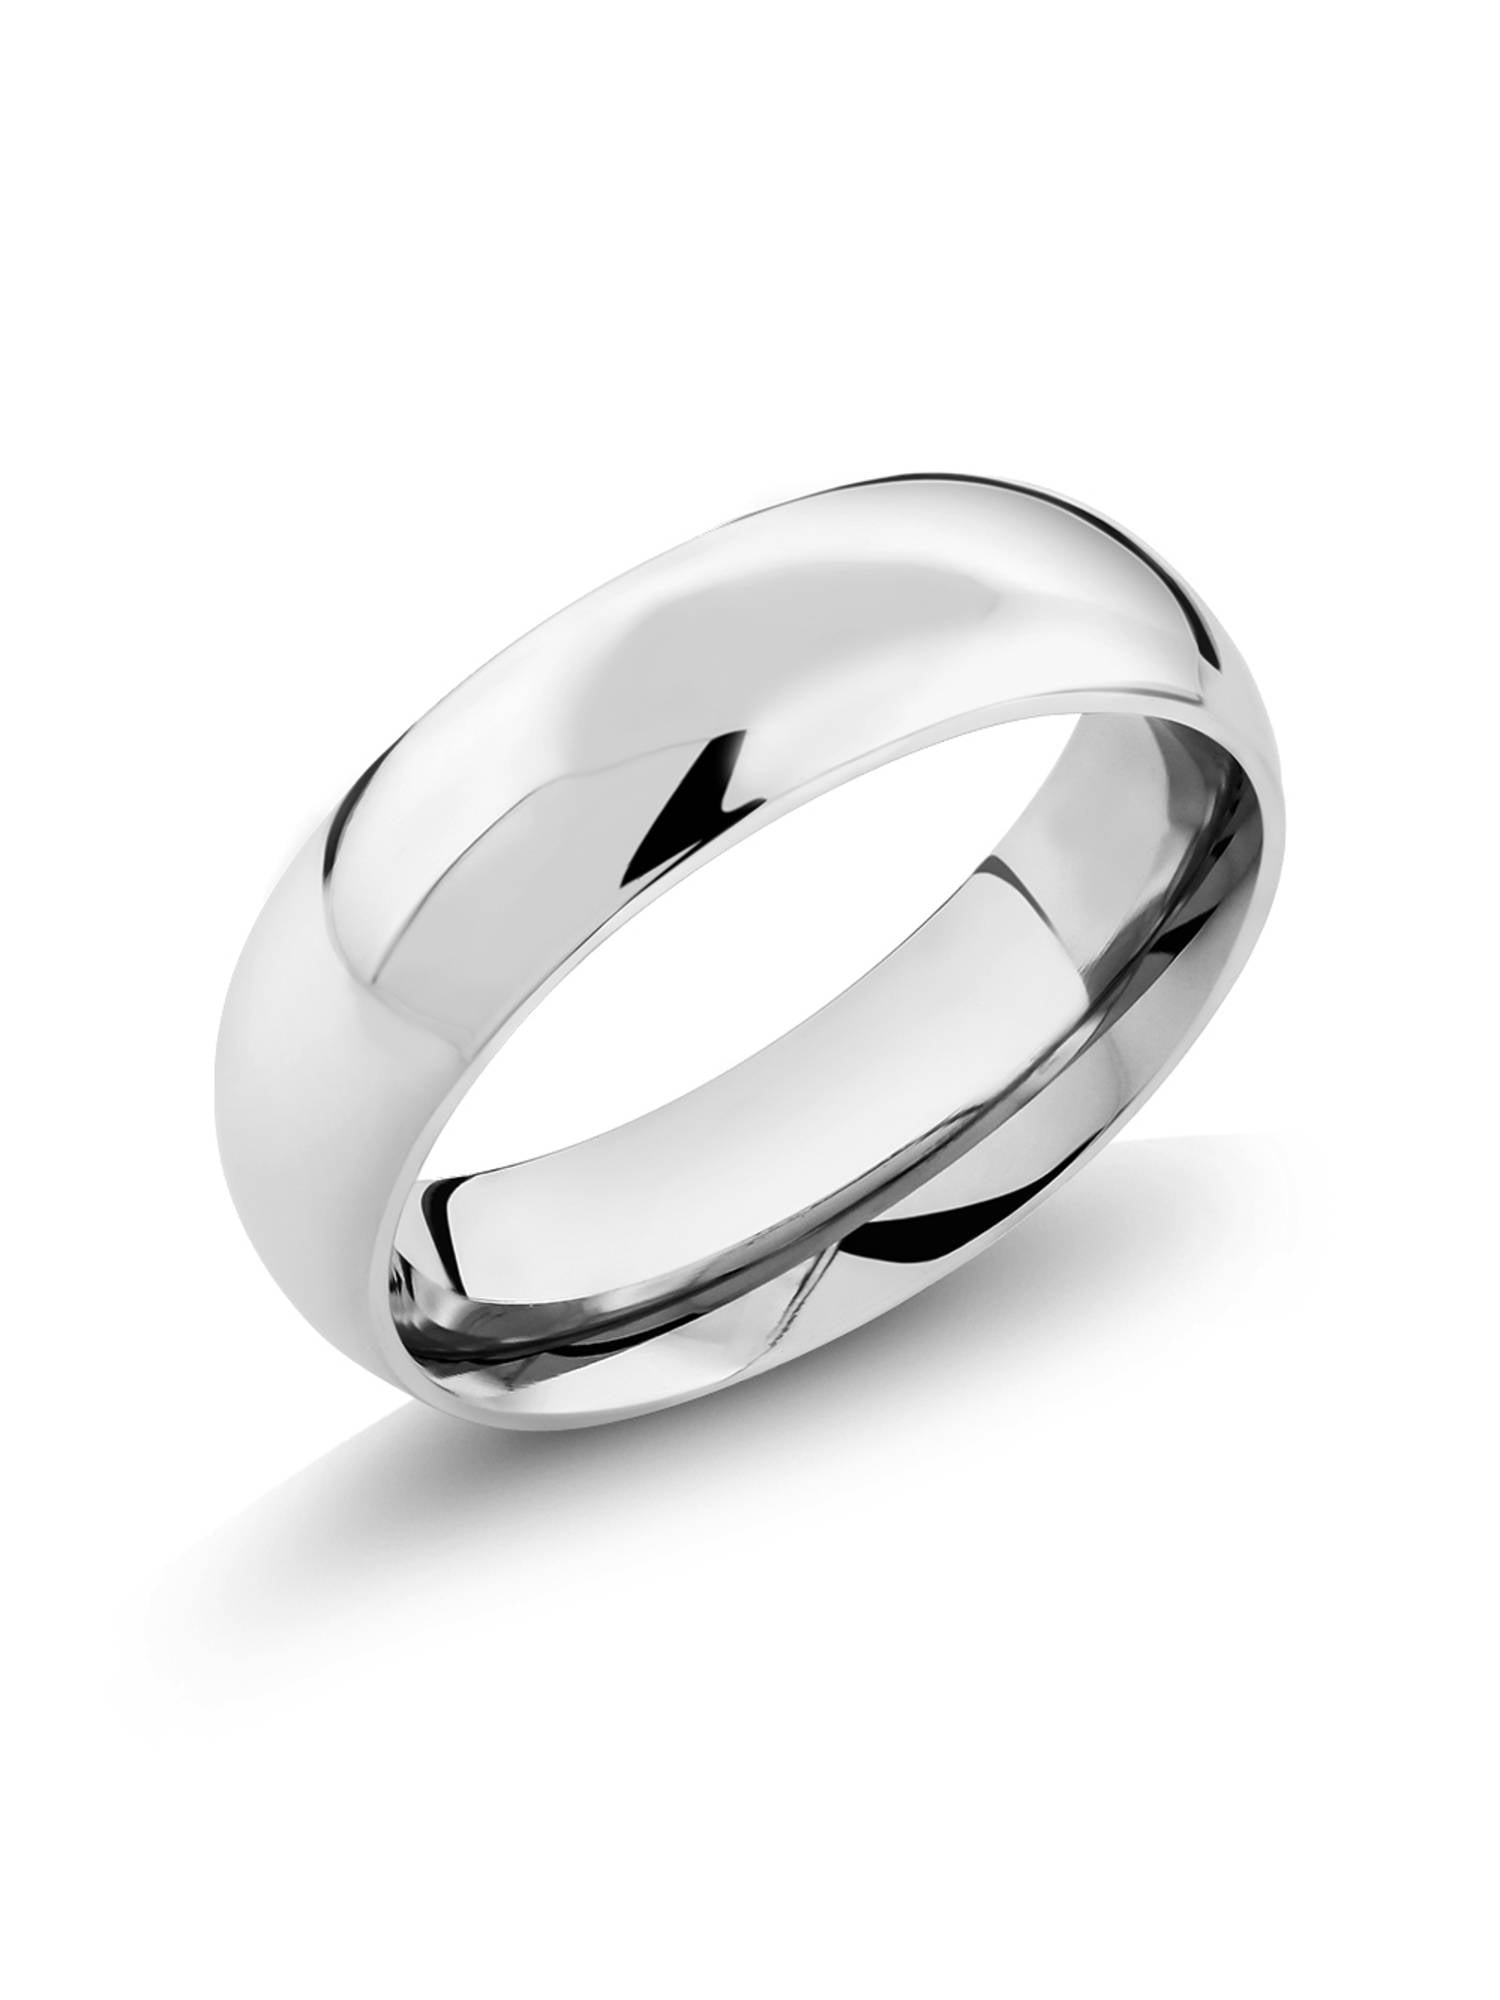 6mm Wedding Band Ring Stainless Steel Half Round Polished Grooved Traditional. 